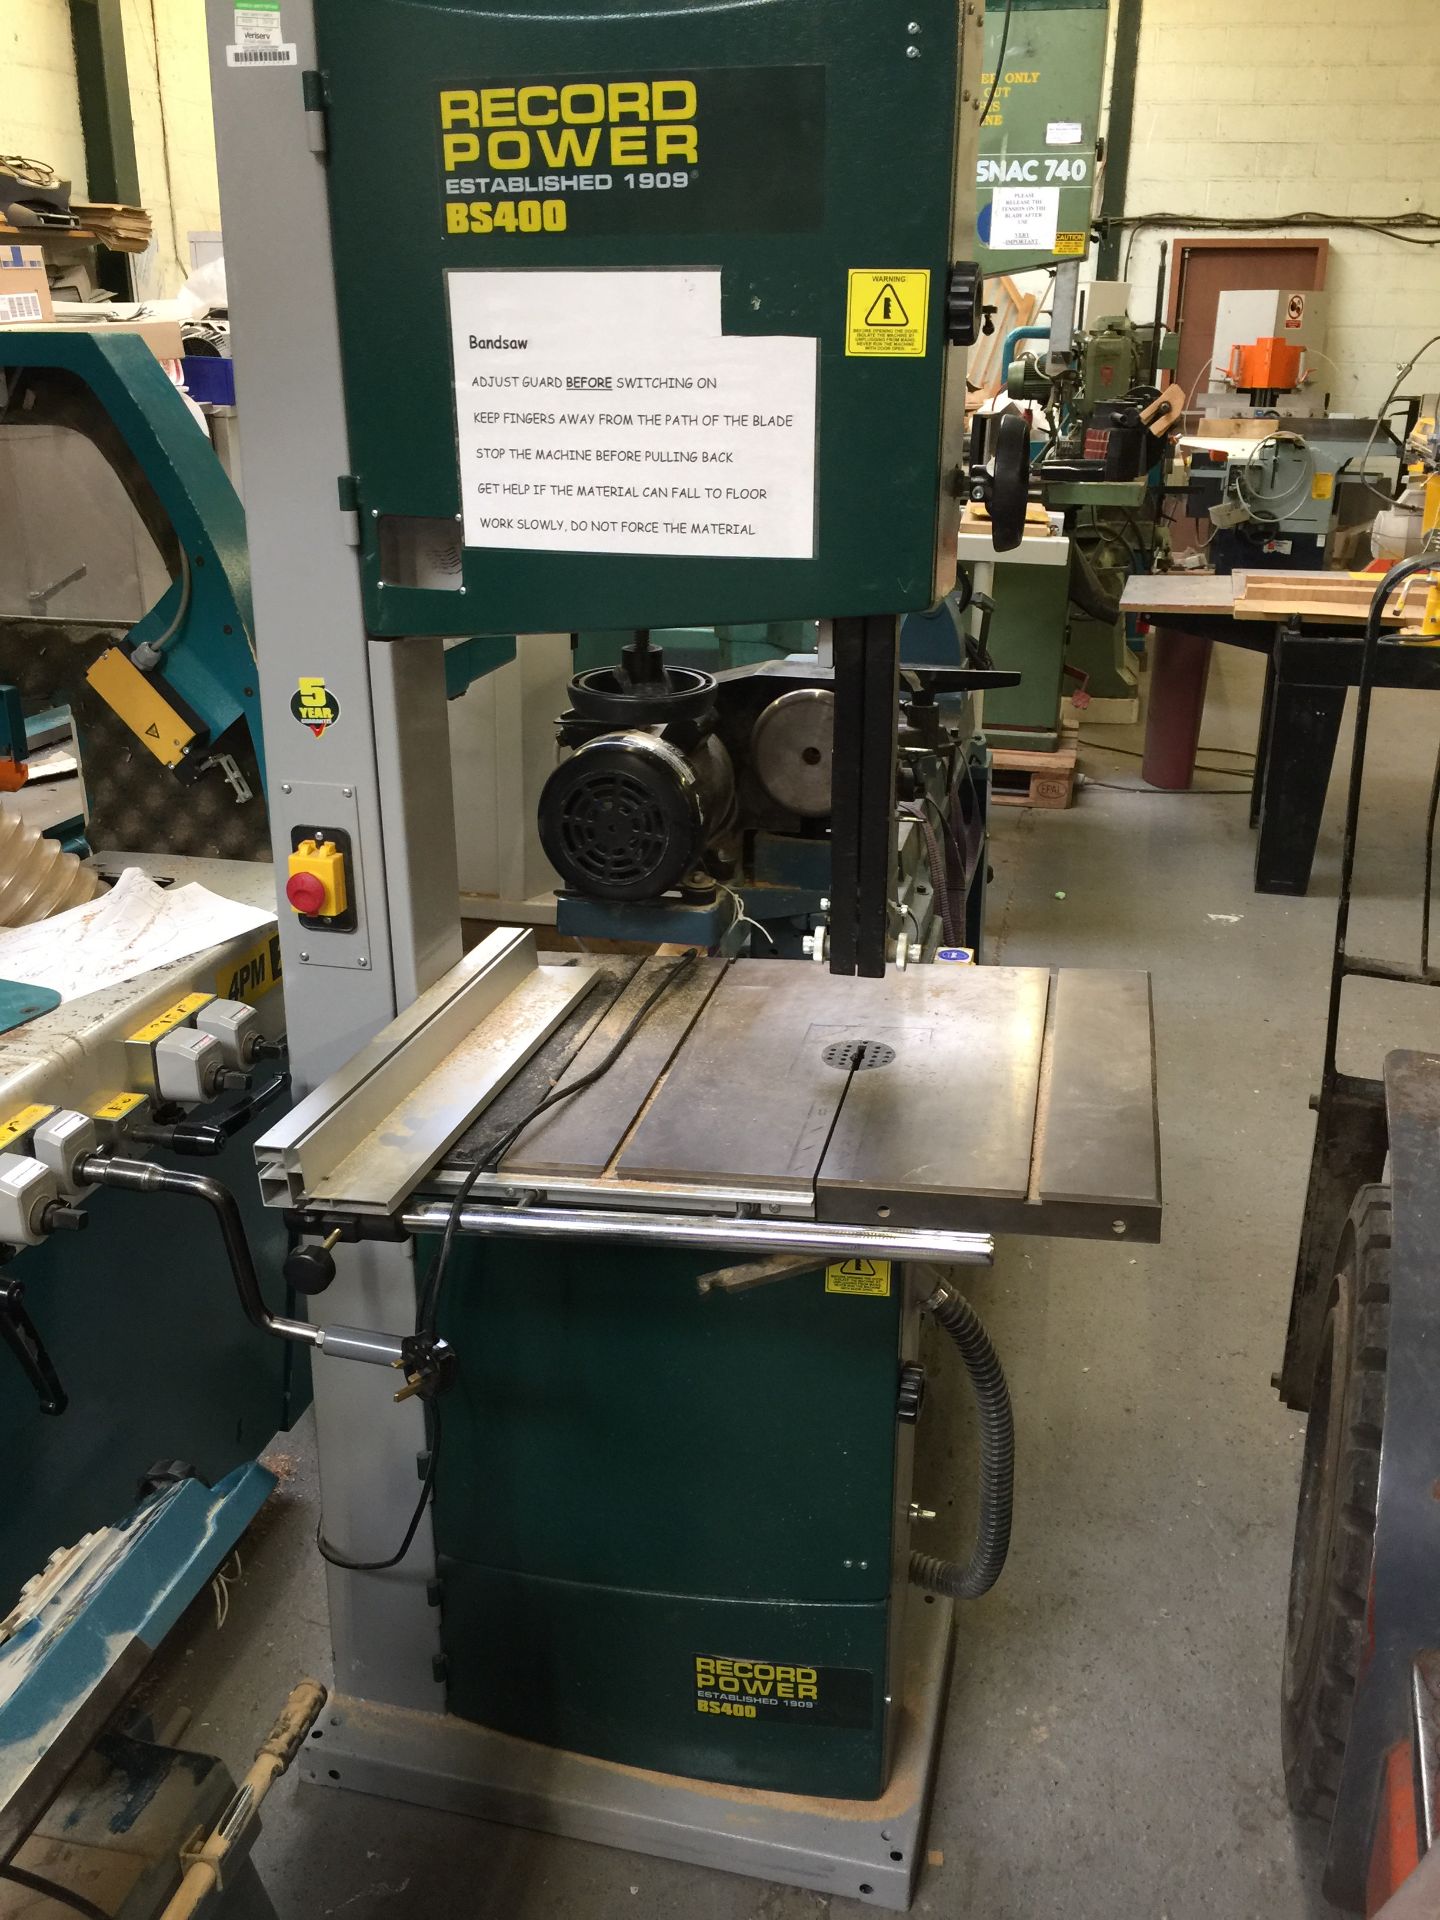 Record Power BS 440 Narrow Bandsaw, 415 mm width of cut, 1 Phase 240 Volts